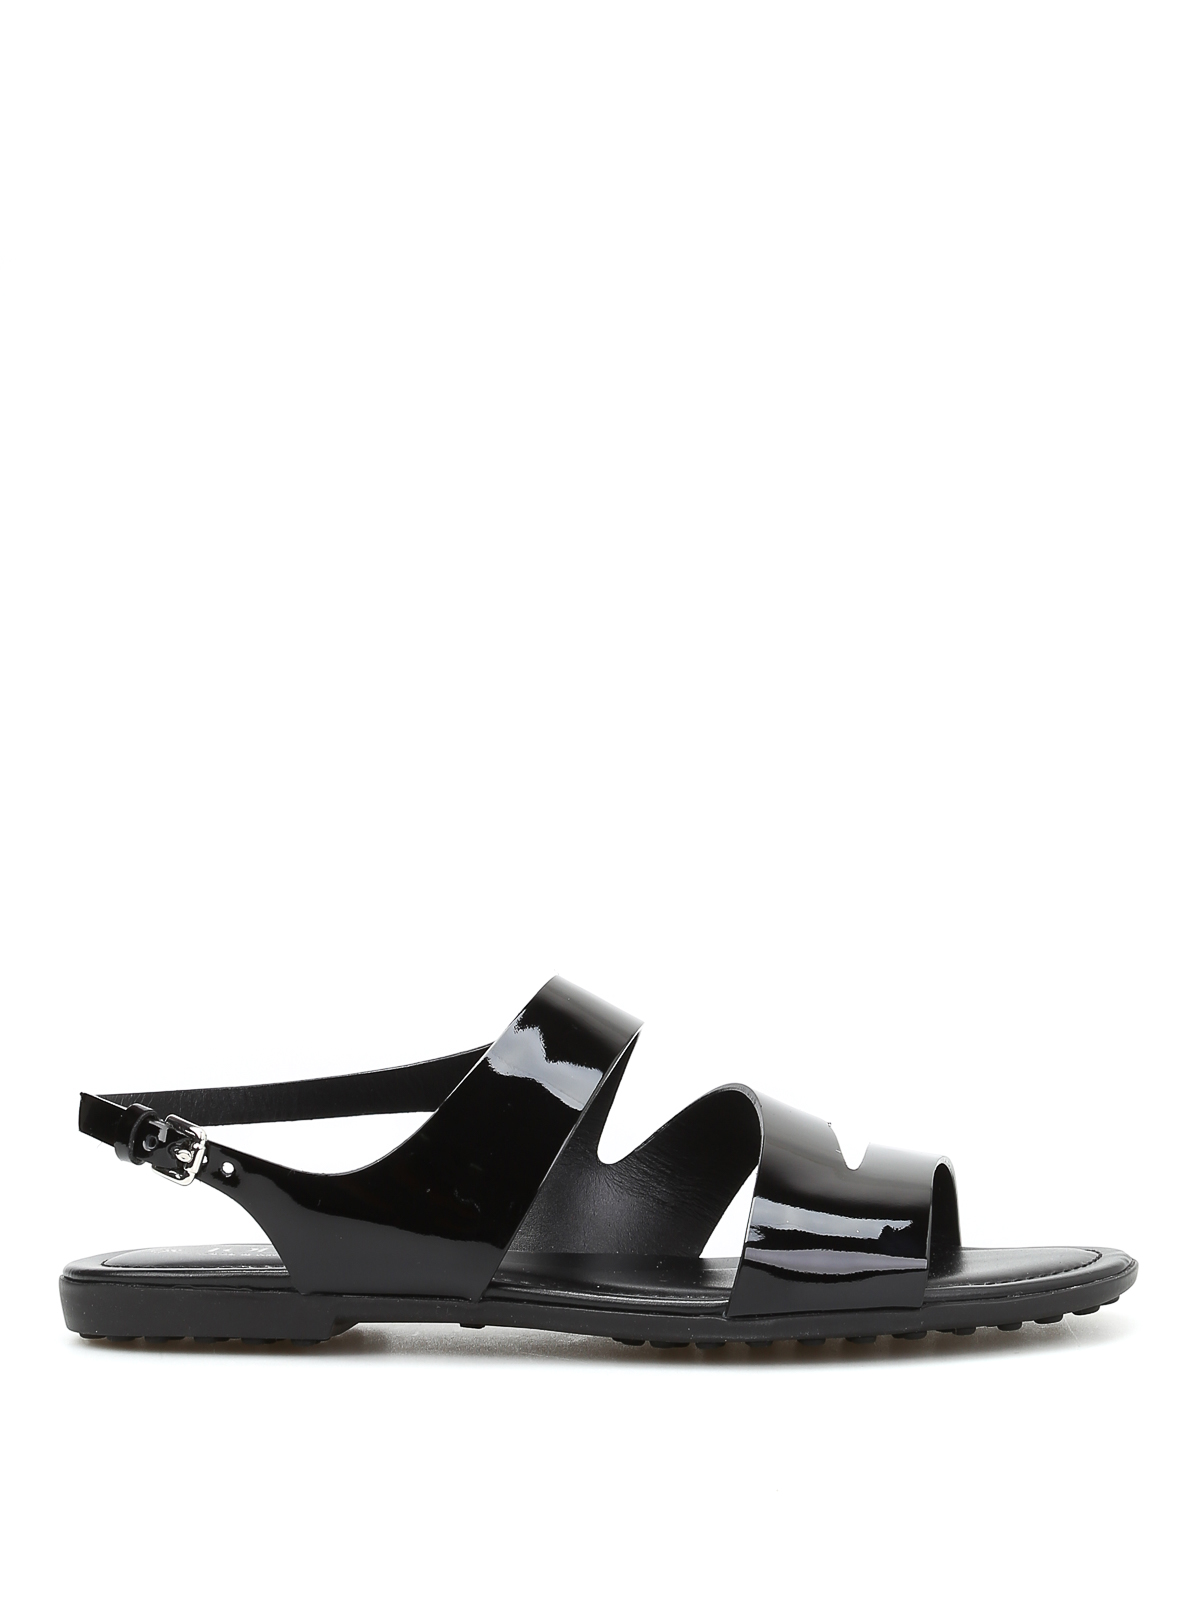 TOD'S RUBBERIZED LEATHER SANDALS